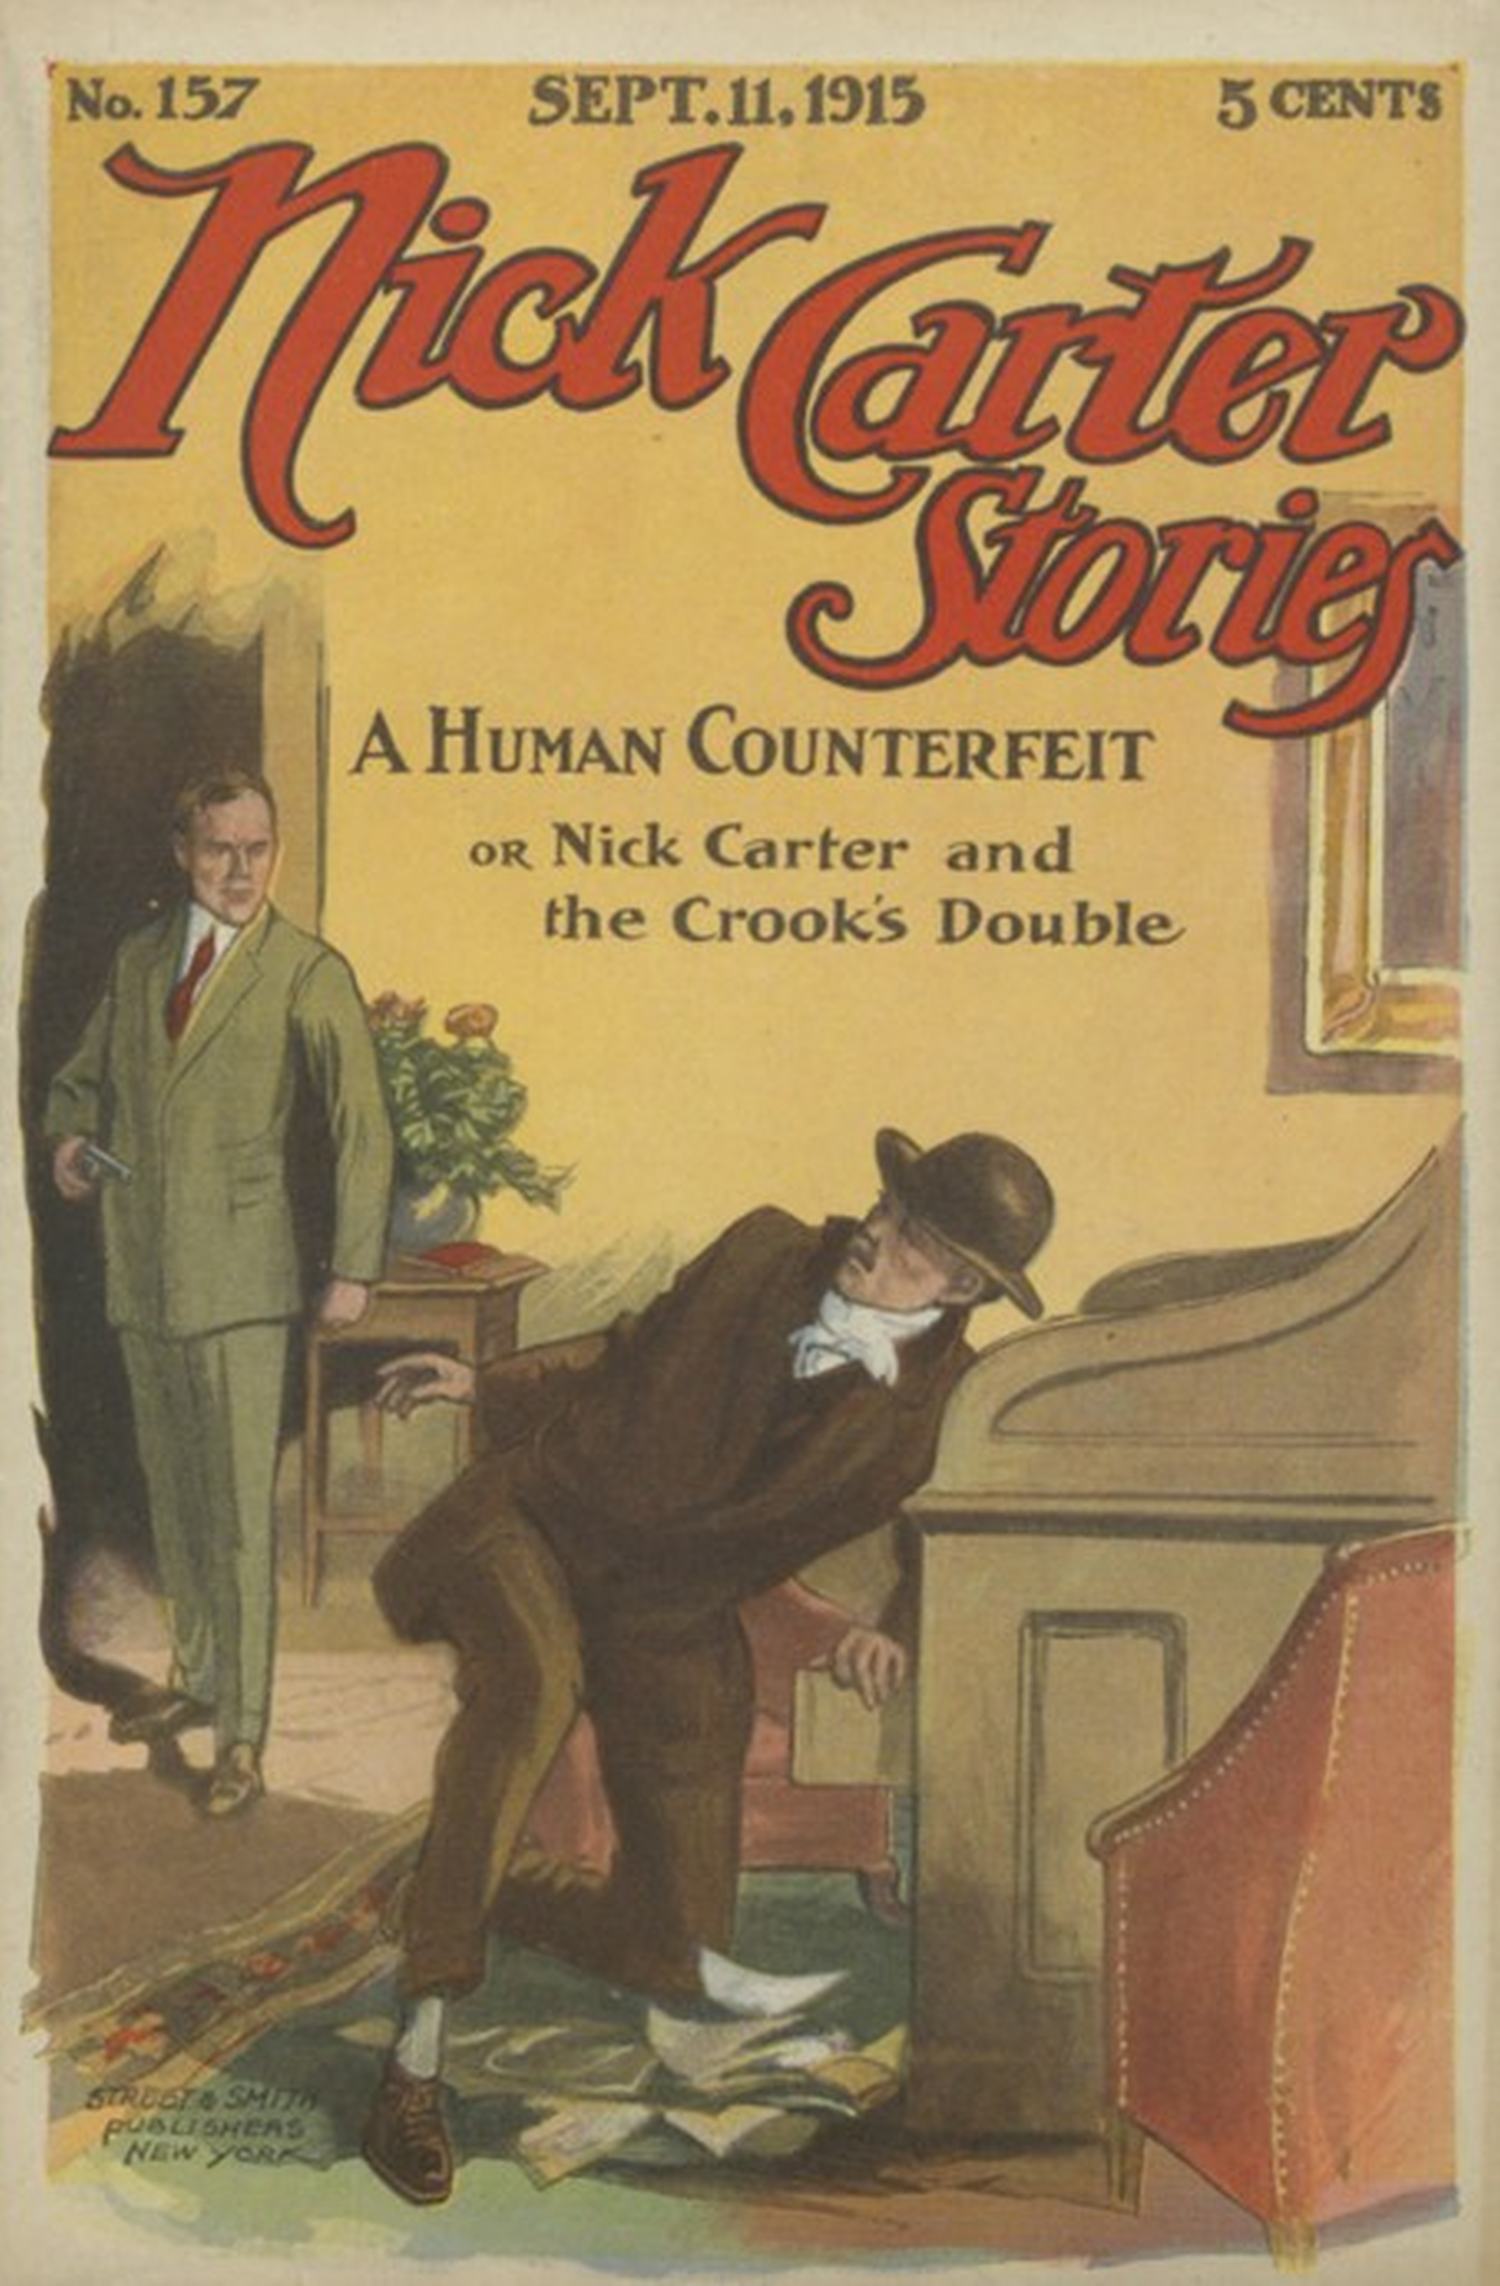 The Project Gutenberg eBook of A human counterfeit, by Nick Carter.